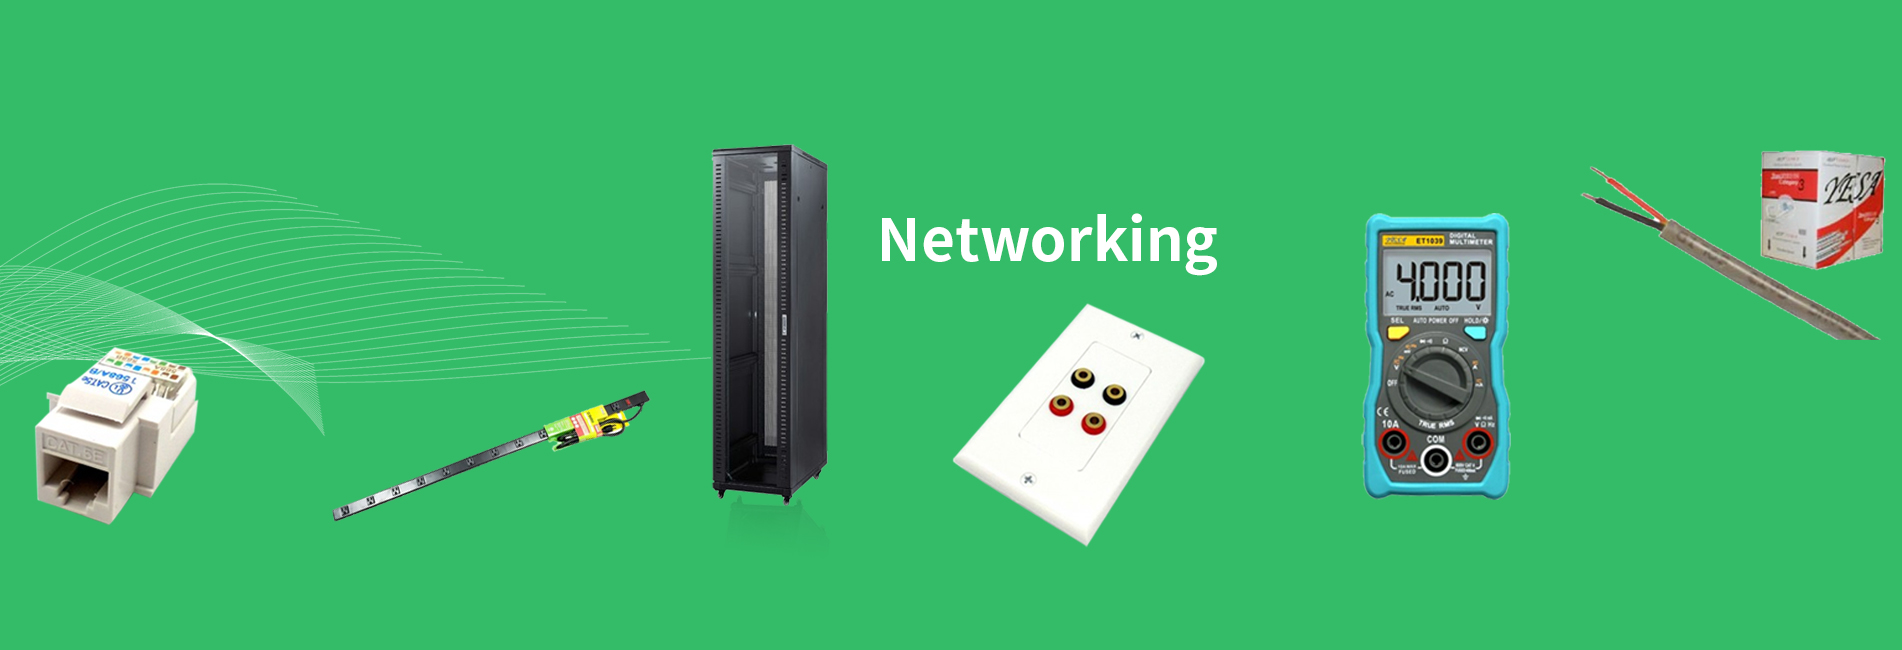 Networking banner_2